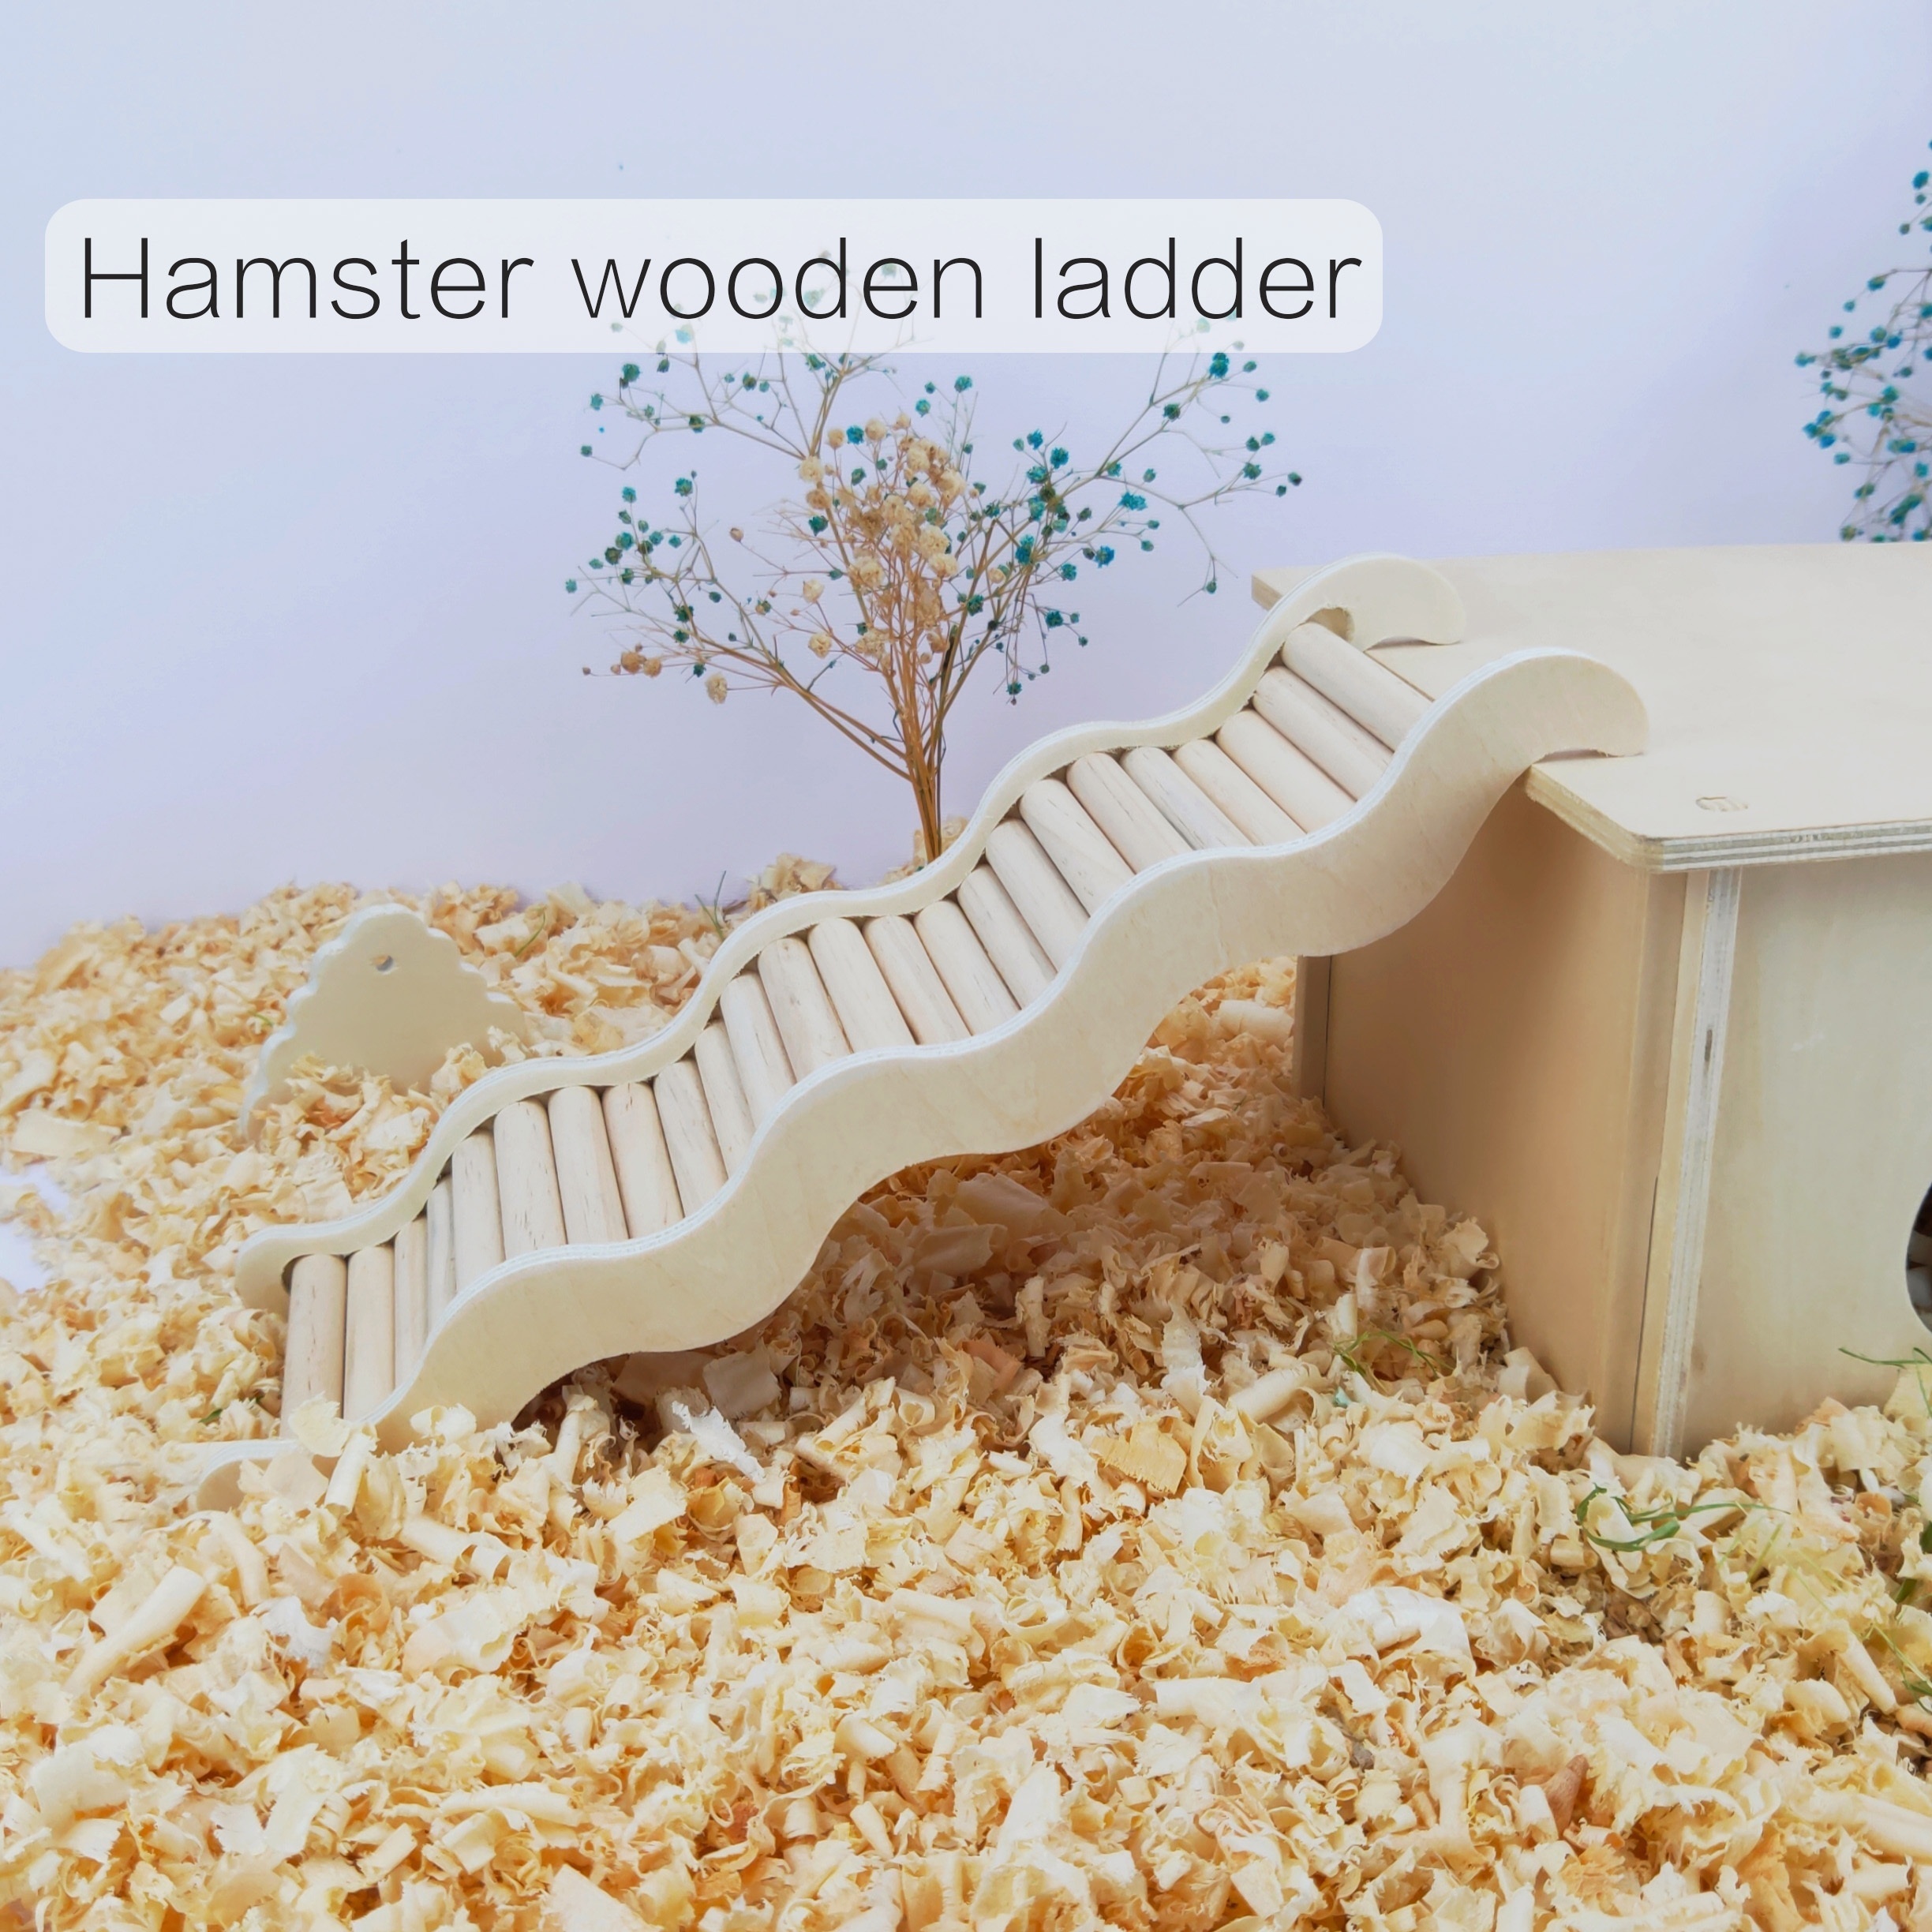 

Fun And Safe Hamster Climbing Toy - Exercise Platform With Stairs And Bridge For Pet Mice And Hamsters